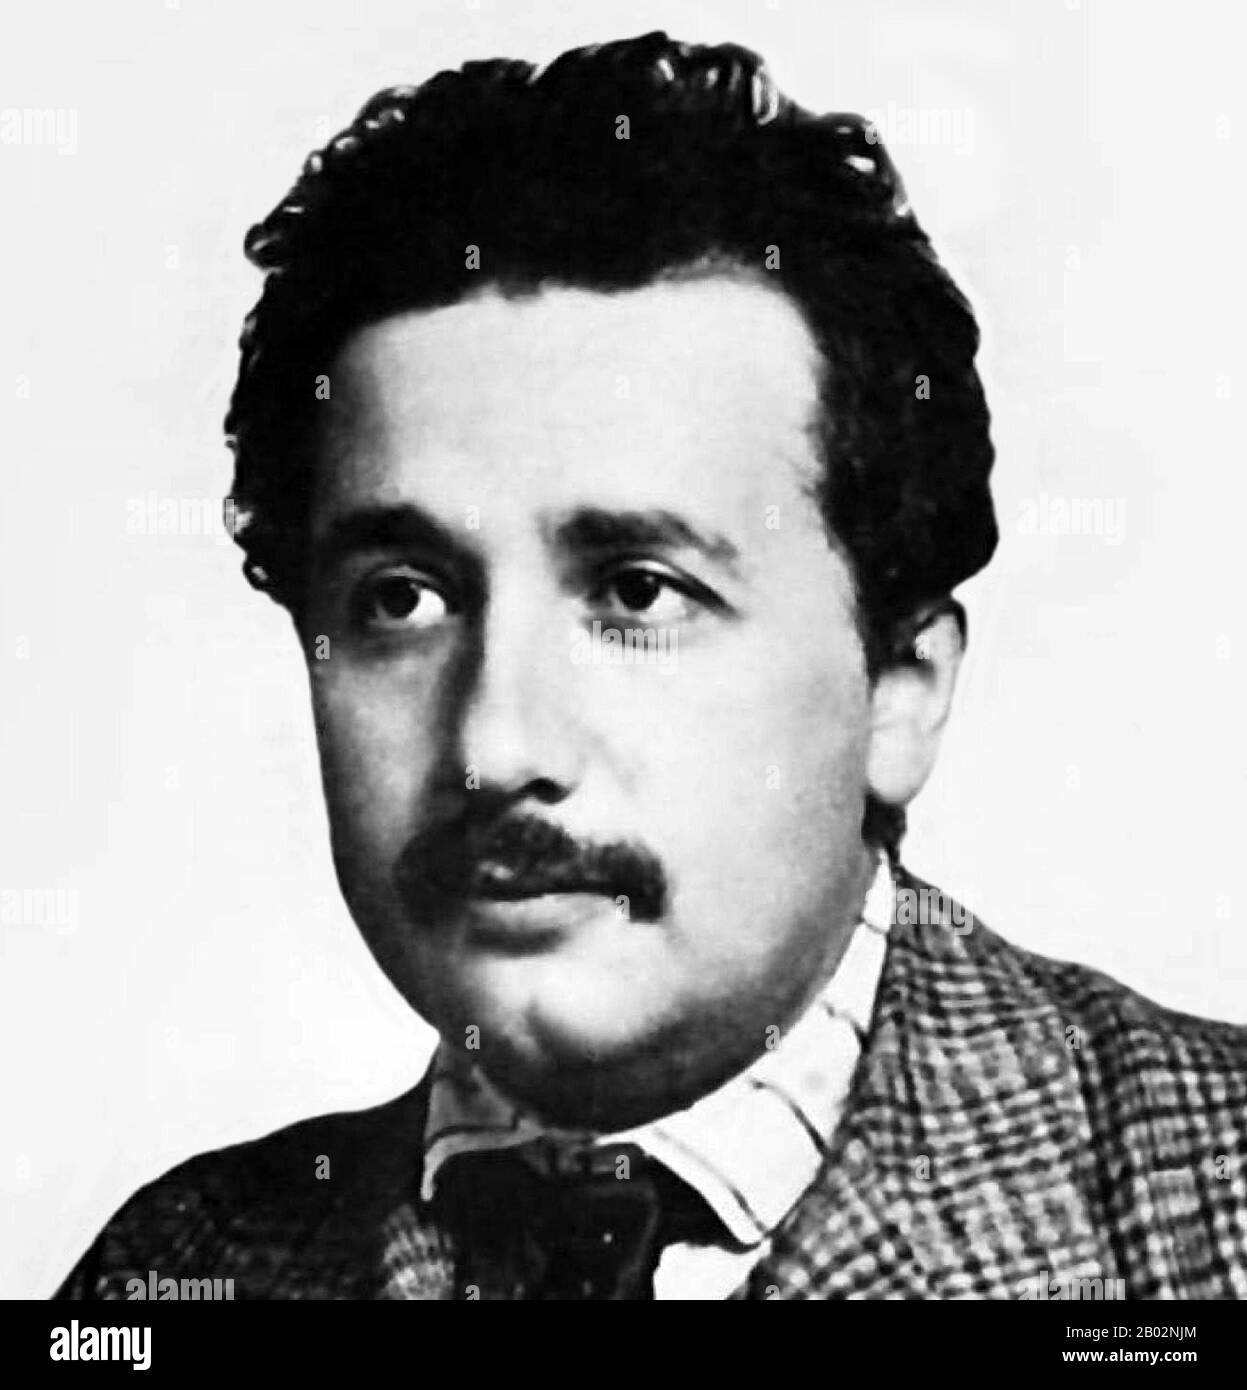 Albert Einstein (14 March 1879 – 18 April 1955) was a German-born theoretical physicist and philosopher of science. He developed the general theory of relativity, one of the two pillars of modern physics (alongside quantum mechanics). He is best known in popular culture for his mass–energy equivalence formula E = mc2 (which has been dubbed 'the world's most famous equation'). He received the 1921 Nobel Prize in Physics 'for his services to theoretical physics, and especially for his discovery of the law of the photoelectric effect'. The latter was pivotal in establishing quantum theory.  Einst Stock Photo